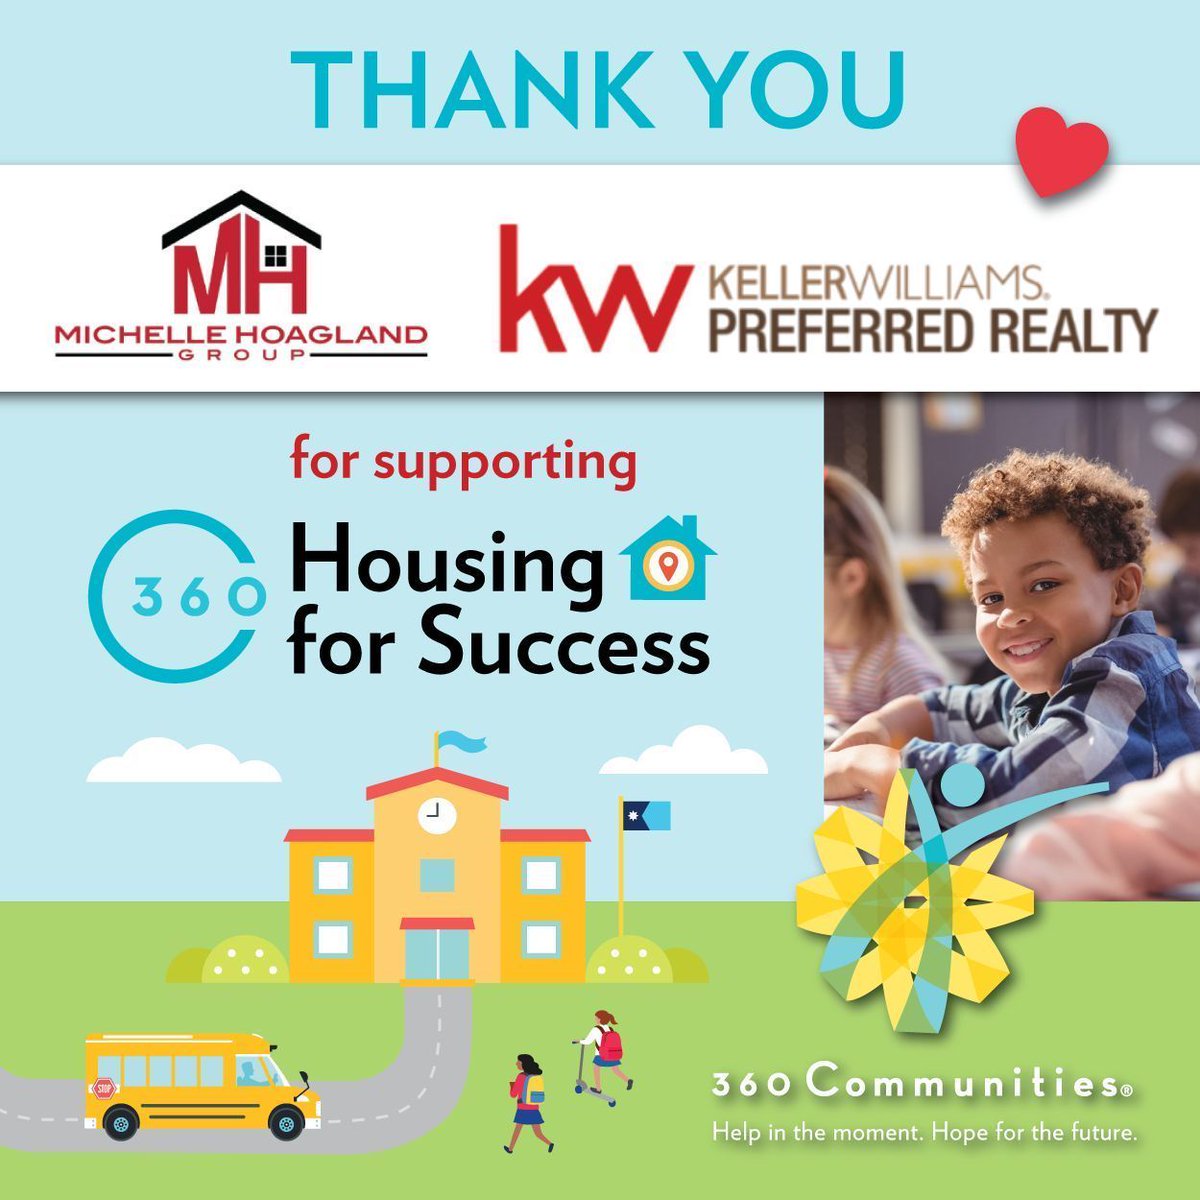 Thank you to Michelle Hoagland Group of KellerWilliams Preferred Realty who dropped off three welcome home baskets for our Housing for Success program! ❤️ At 360 Communities, we help eligible families take steps to overcome barriers to housing. #HelpInTheMoment #HopeForTheFuture